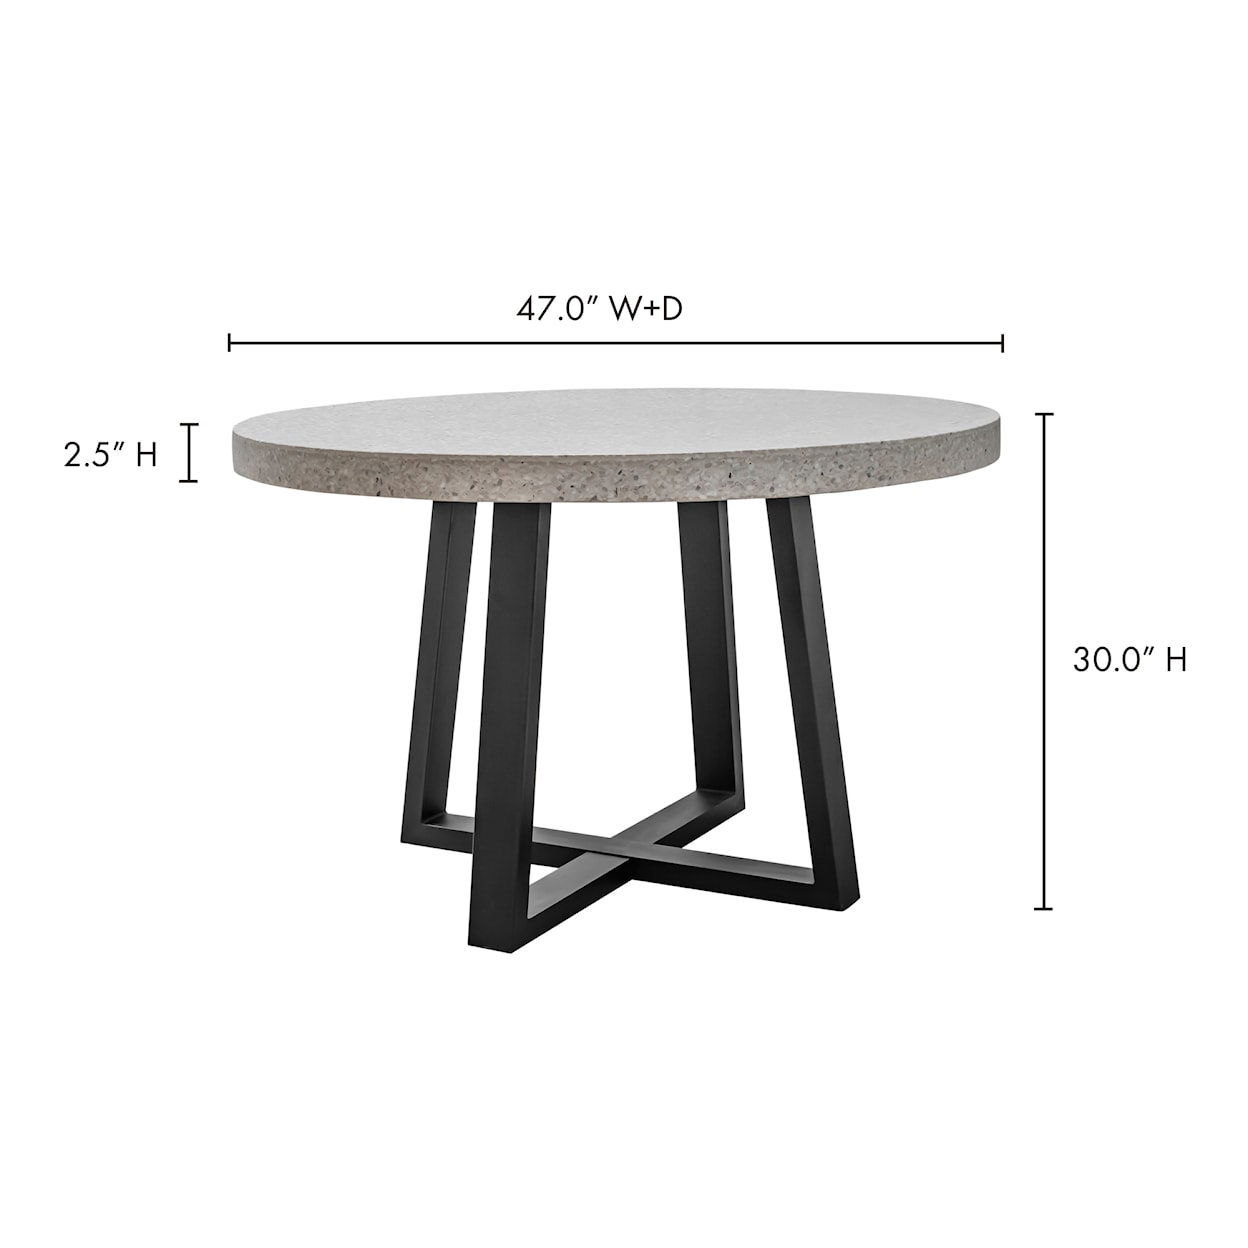 Moe's Home Collection Vault Vault Dining Table White